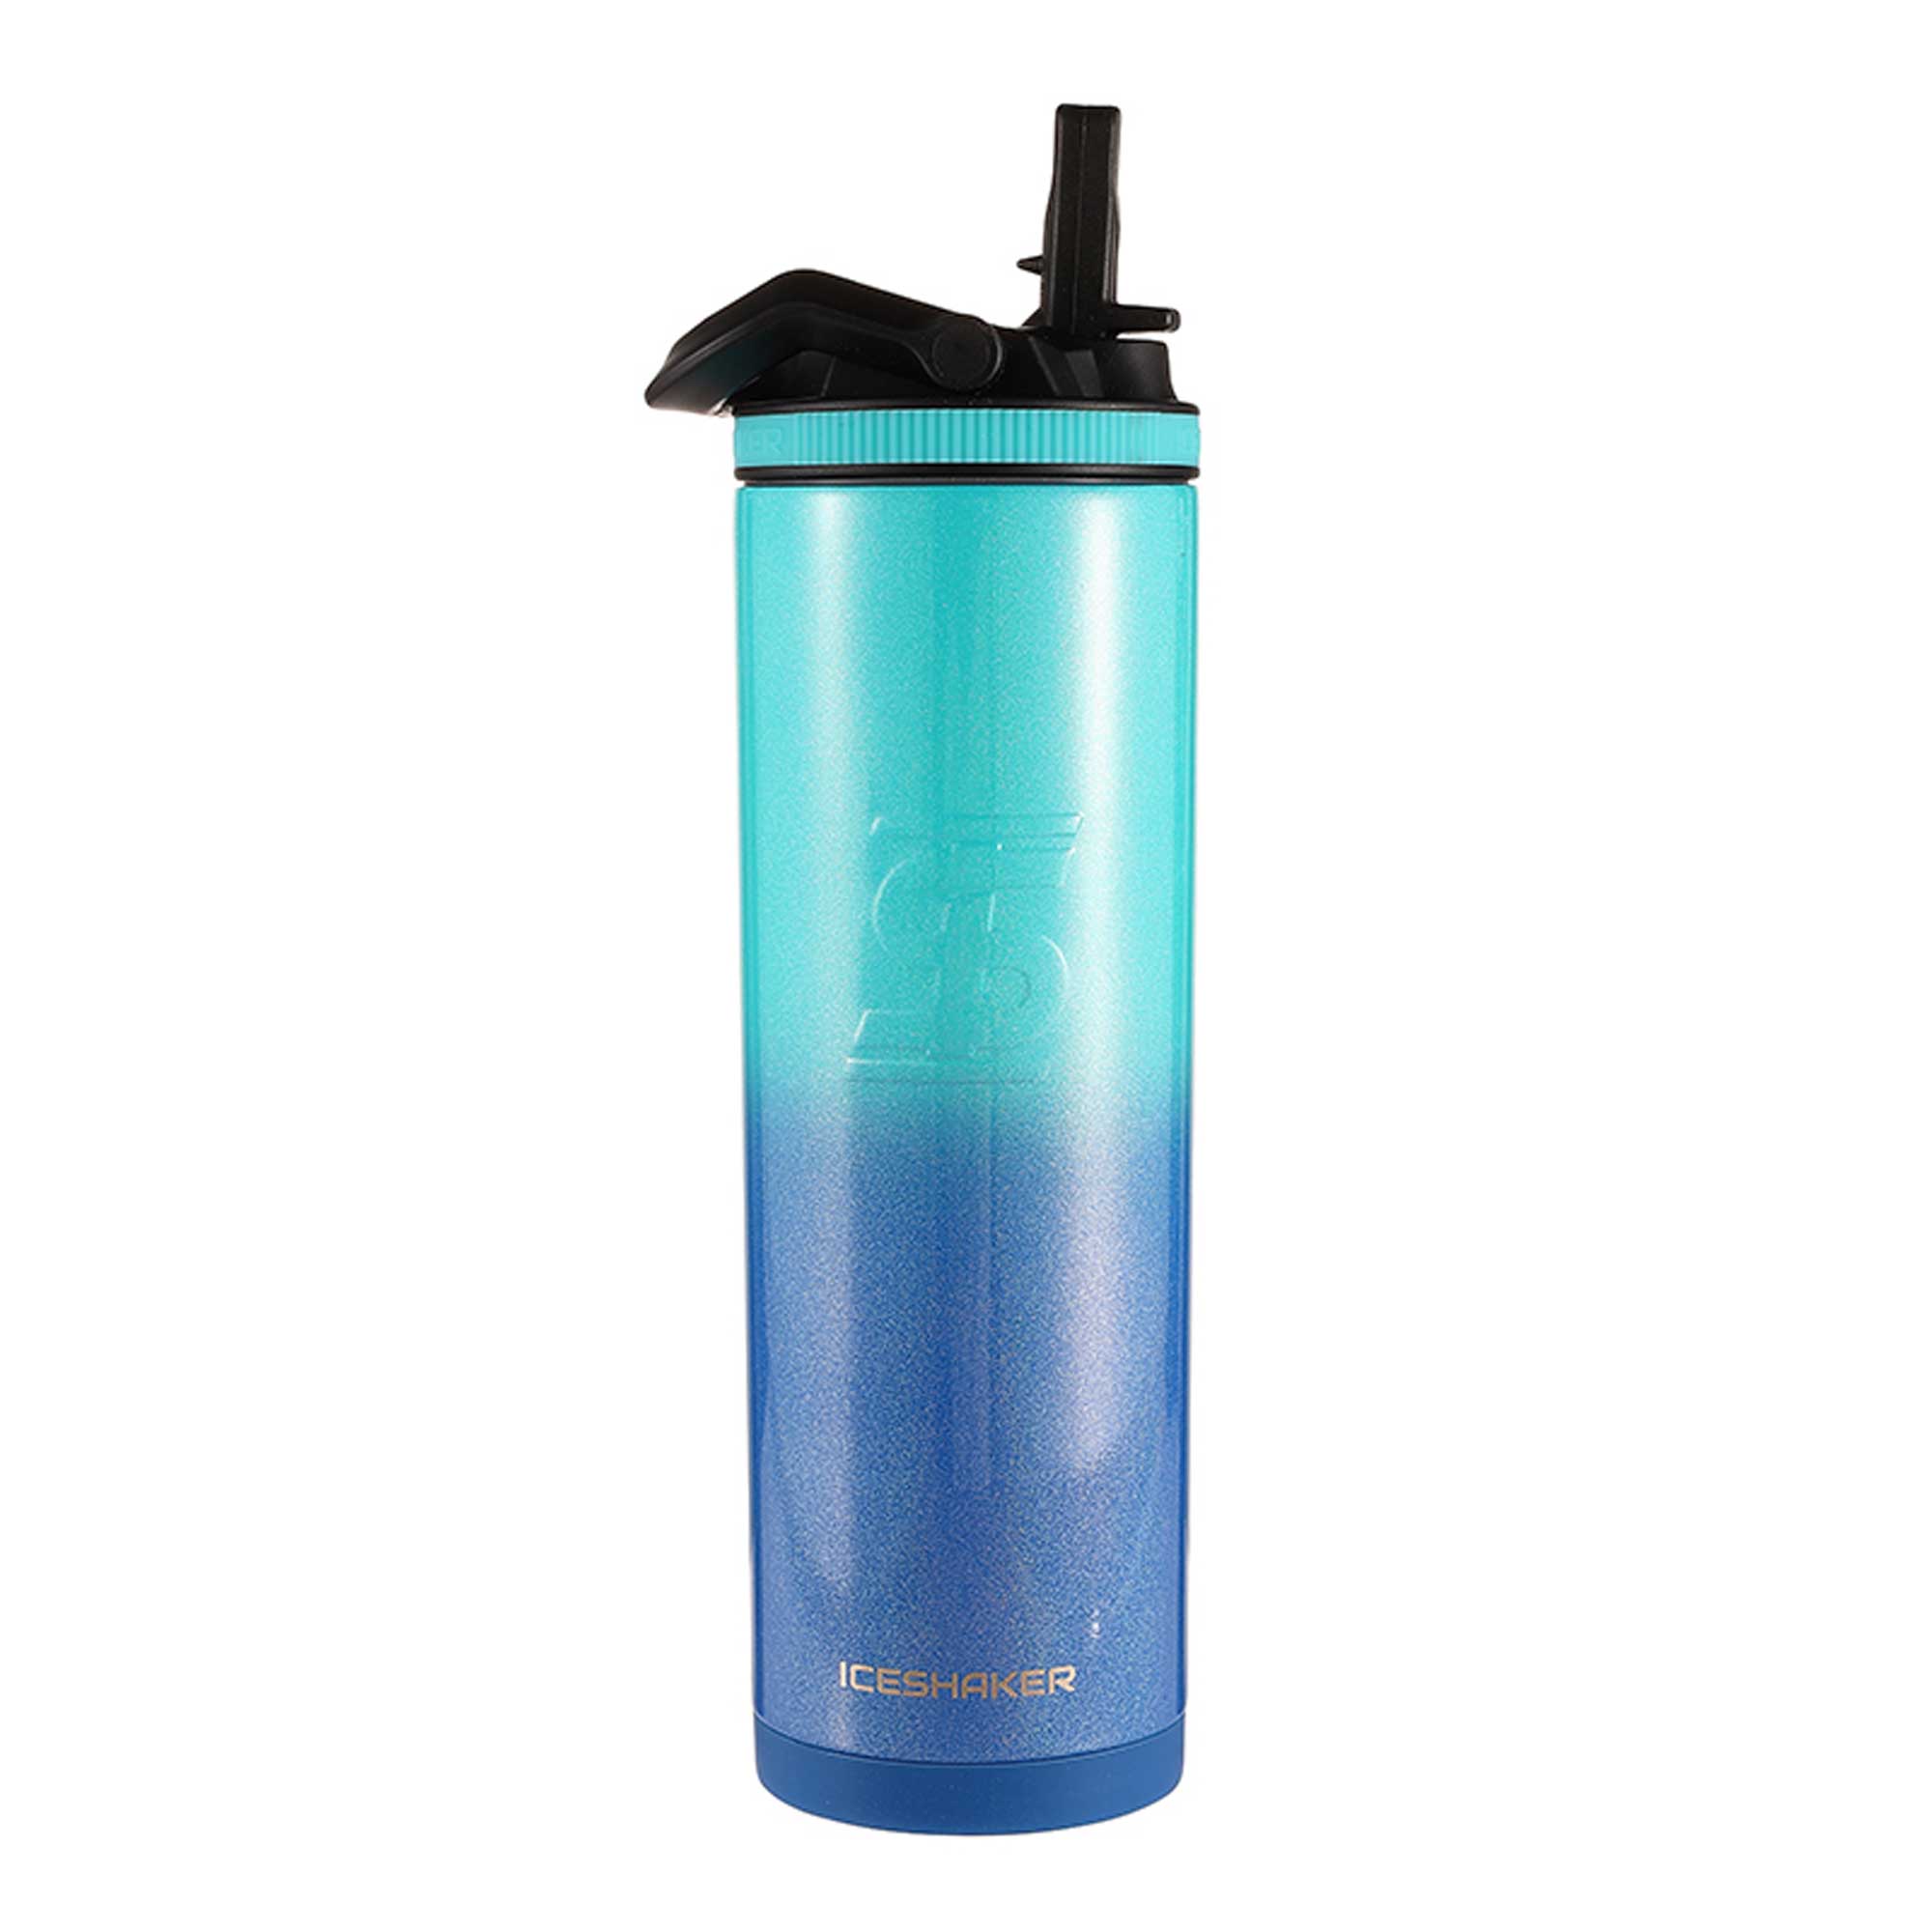  Kids Water Bottle - 12oz Blue, Leak Proof With Straw & Handle, 24 Hours Cold, Insulated, Double Wall Stainless Steel, Easy Sip Toddler  Cup, Child's Flask